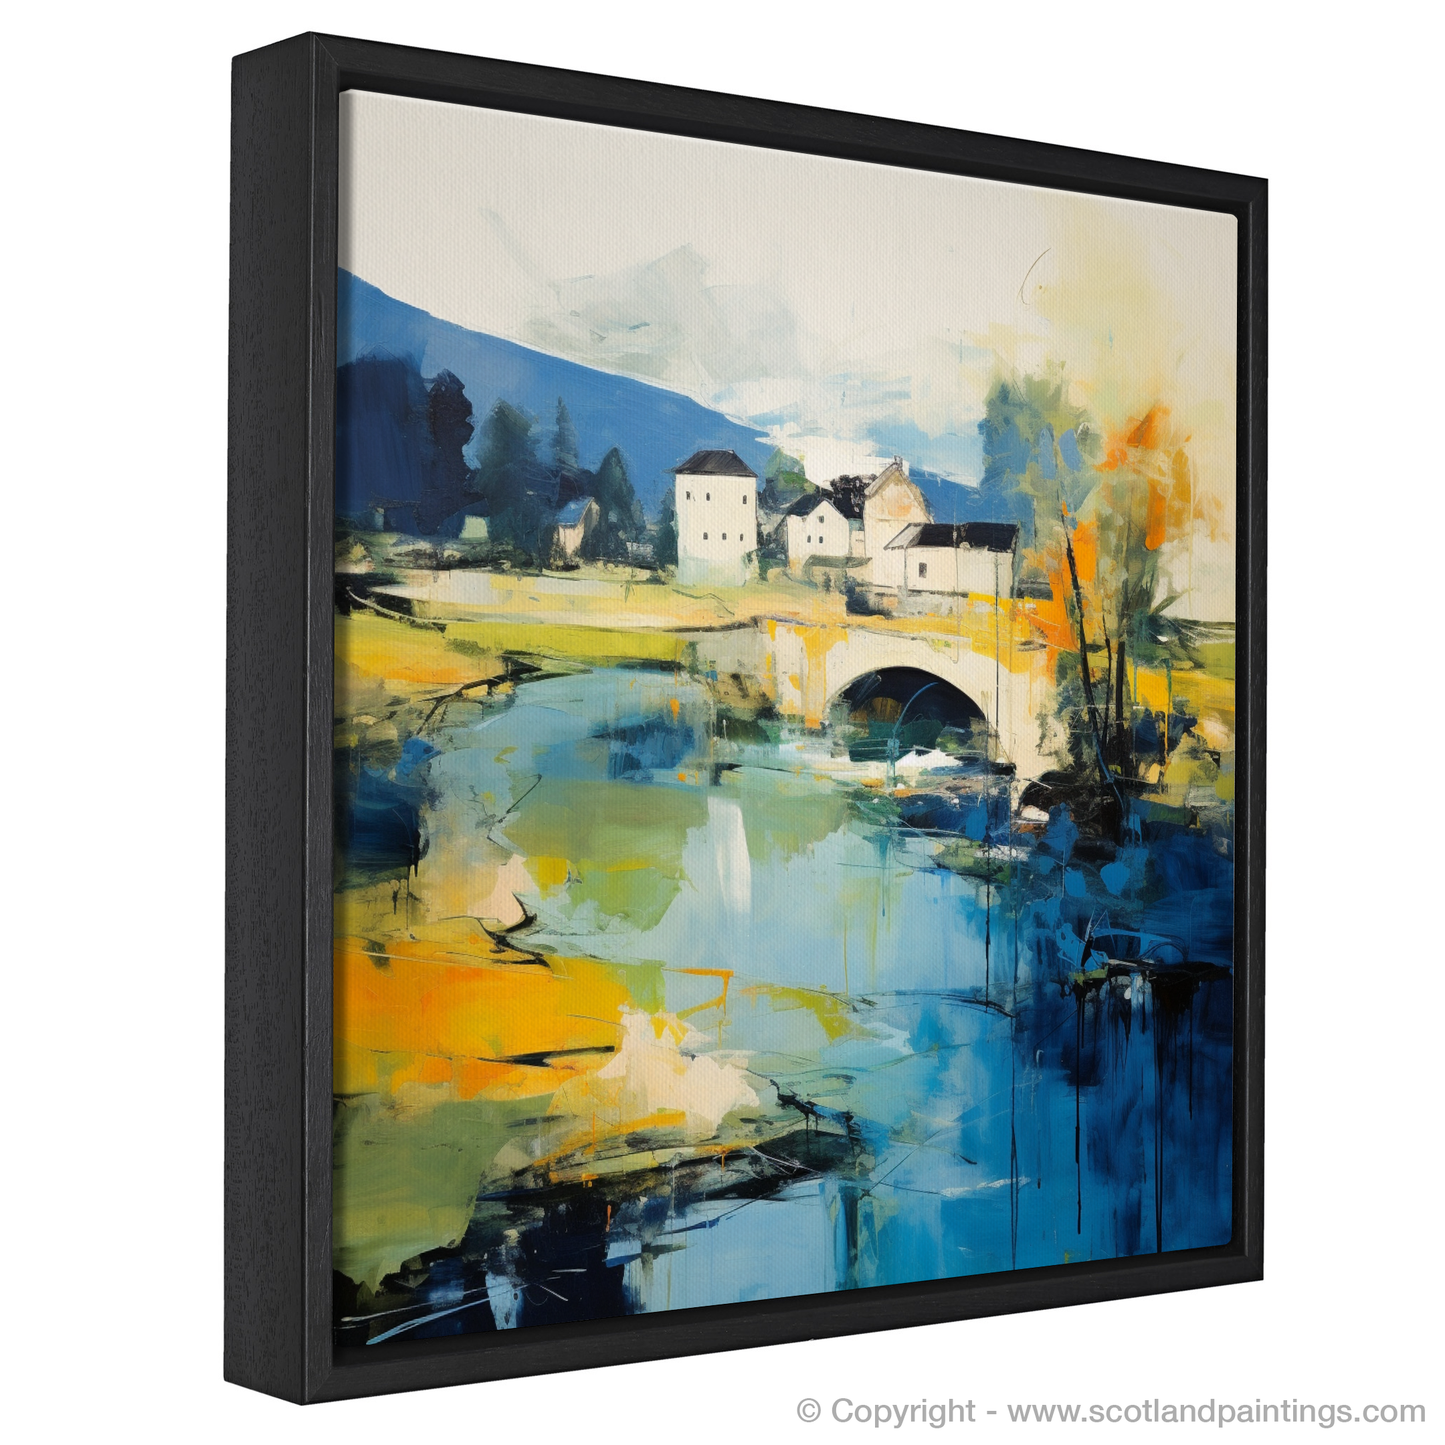 Painting and Art Print of River Almond, Edinburgh in summer entitled "Abstract Essence of River Almond in Summer".